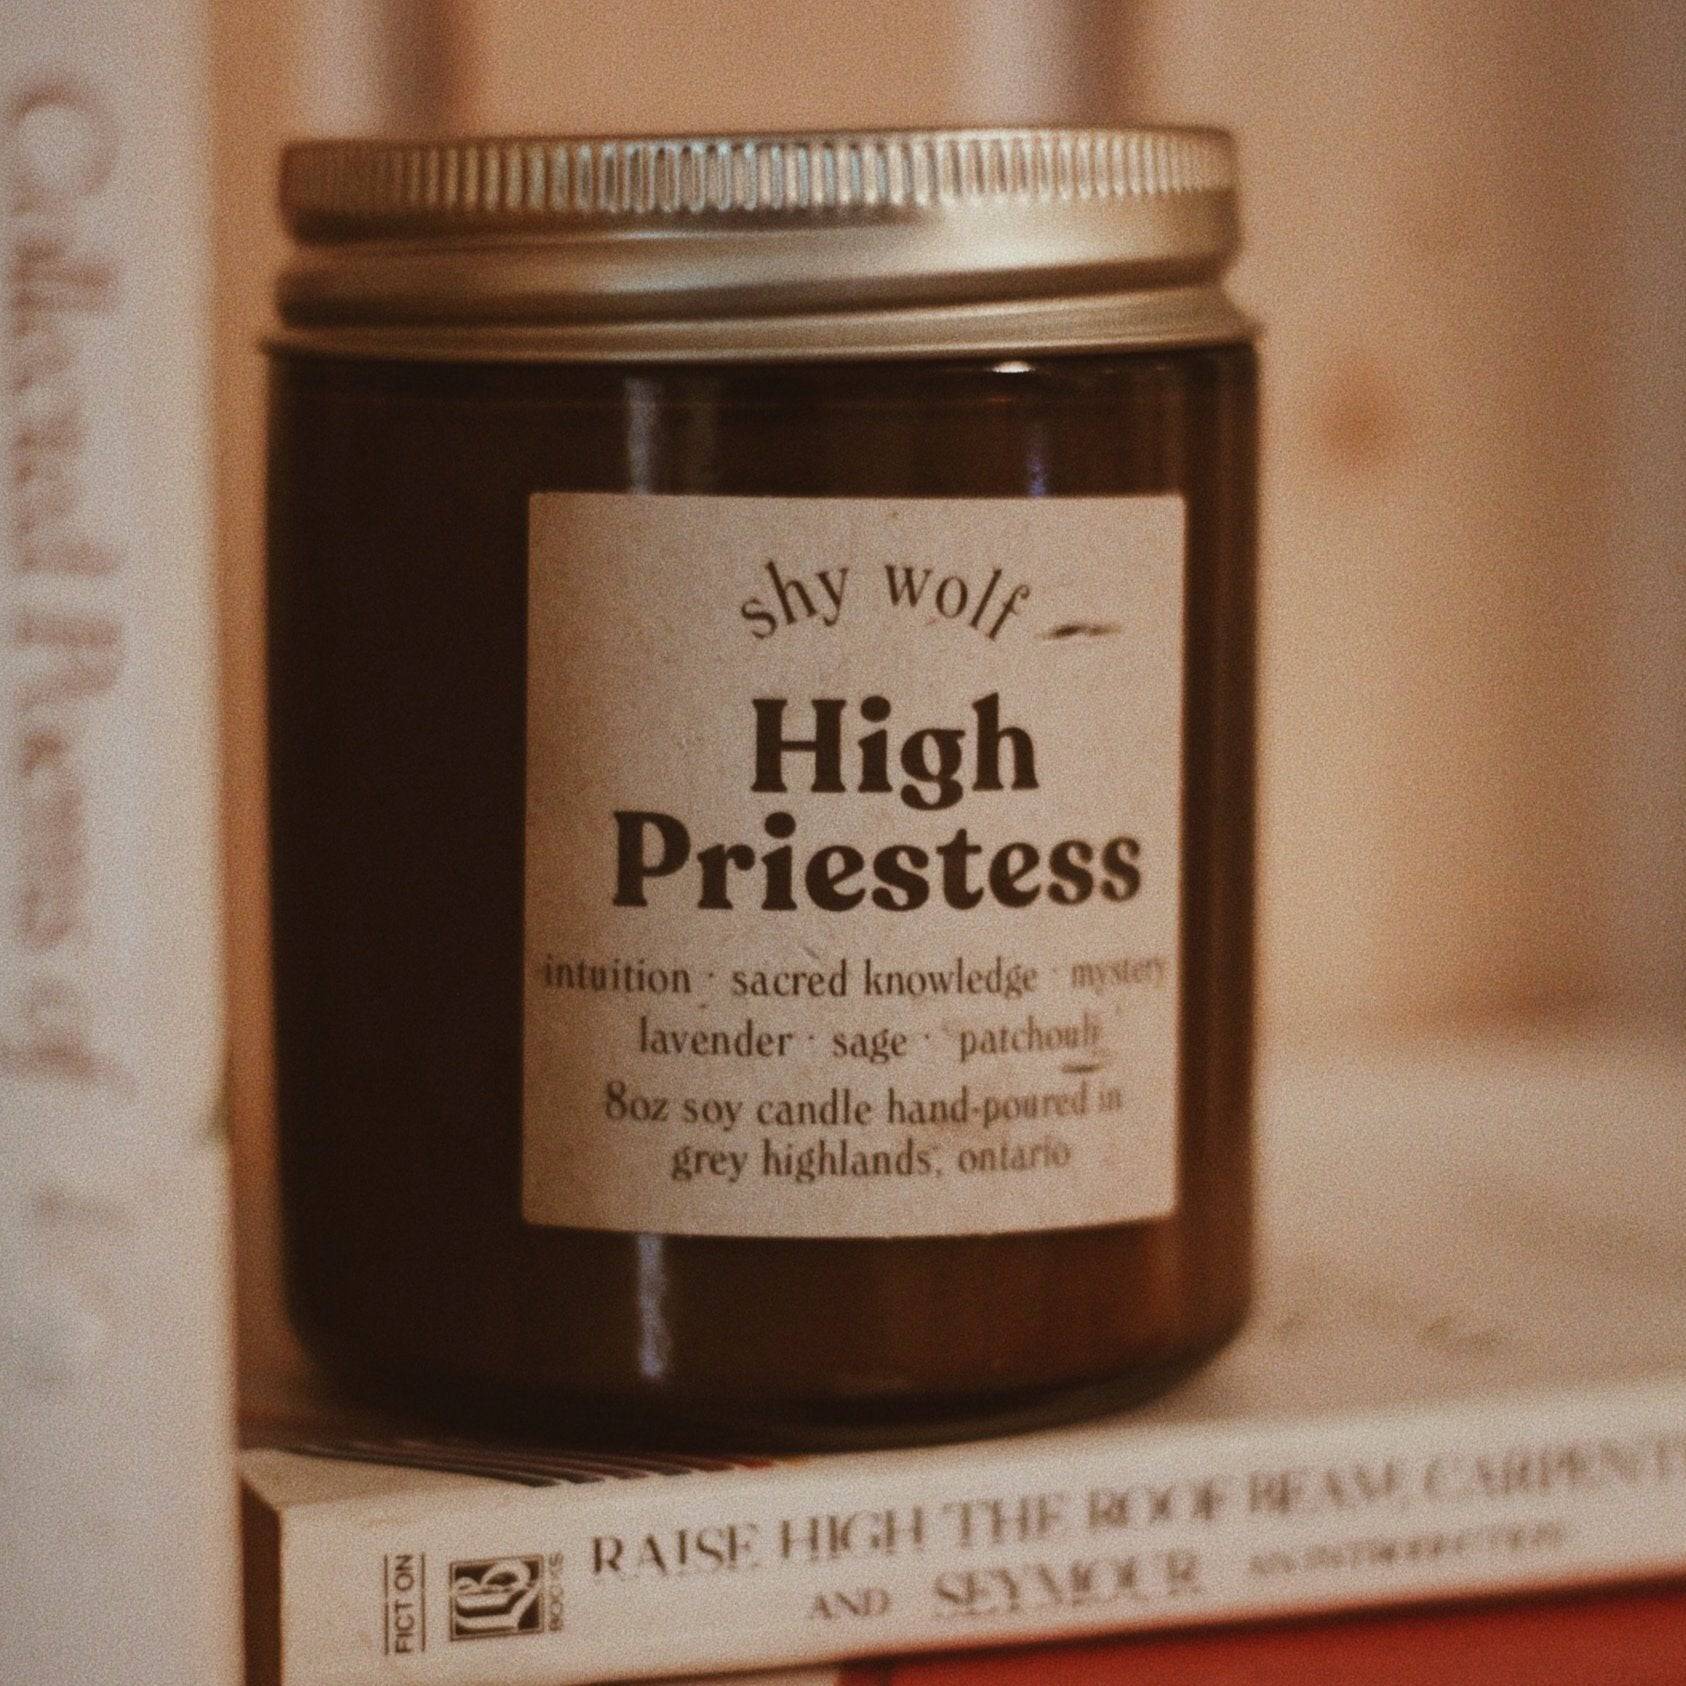 HIGH PRIESTESS CANDLE - Out of the Blue